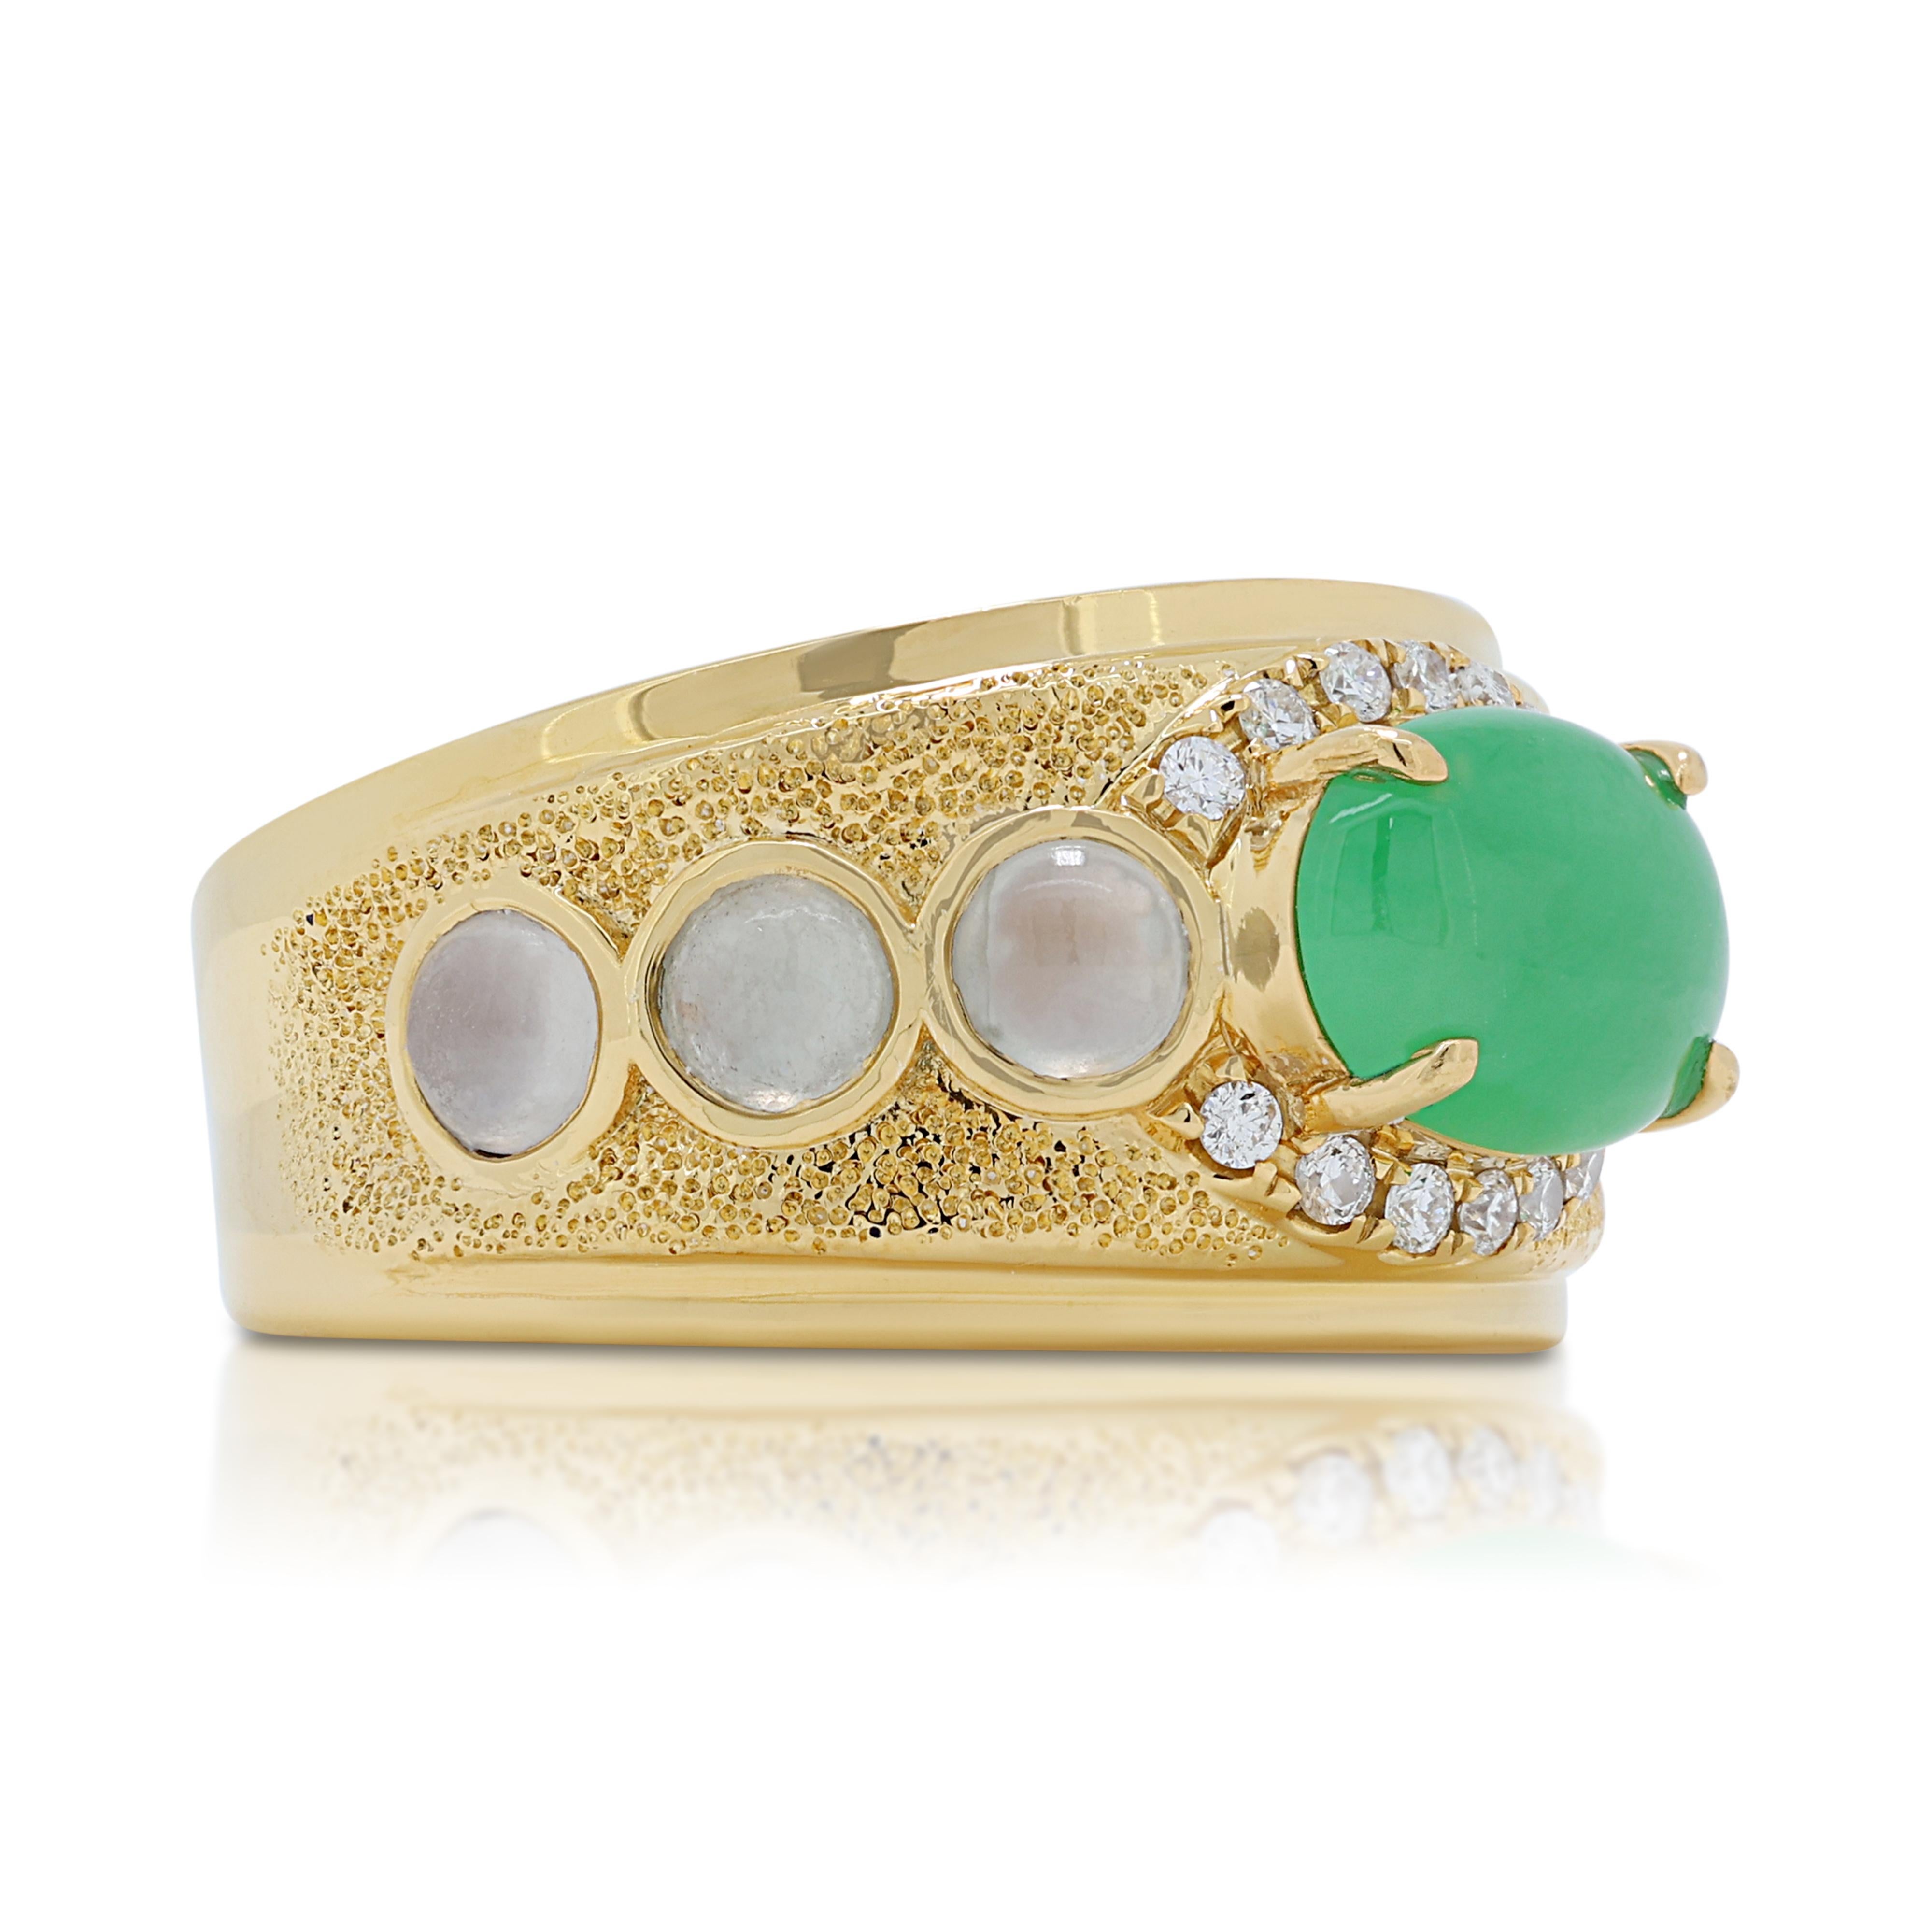 Stunning 2.24ct Jade Dome Ring in 18K Yellow Gold with Diamonds In Excellent Condition For Sale In רמת גן, IL